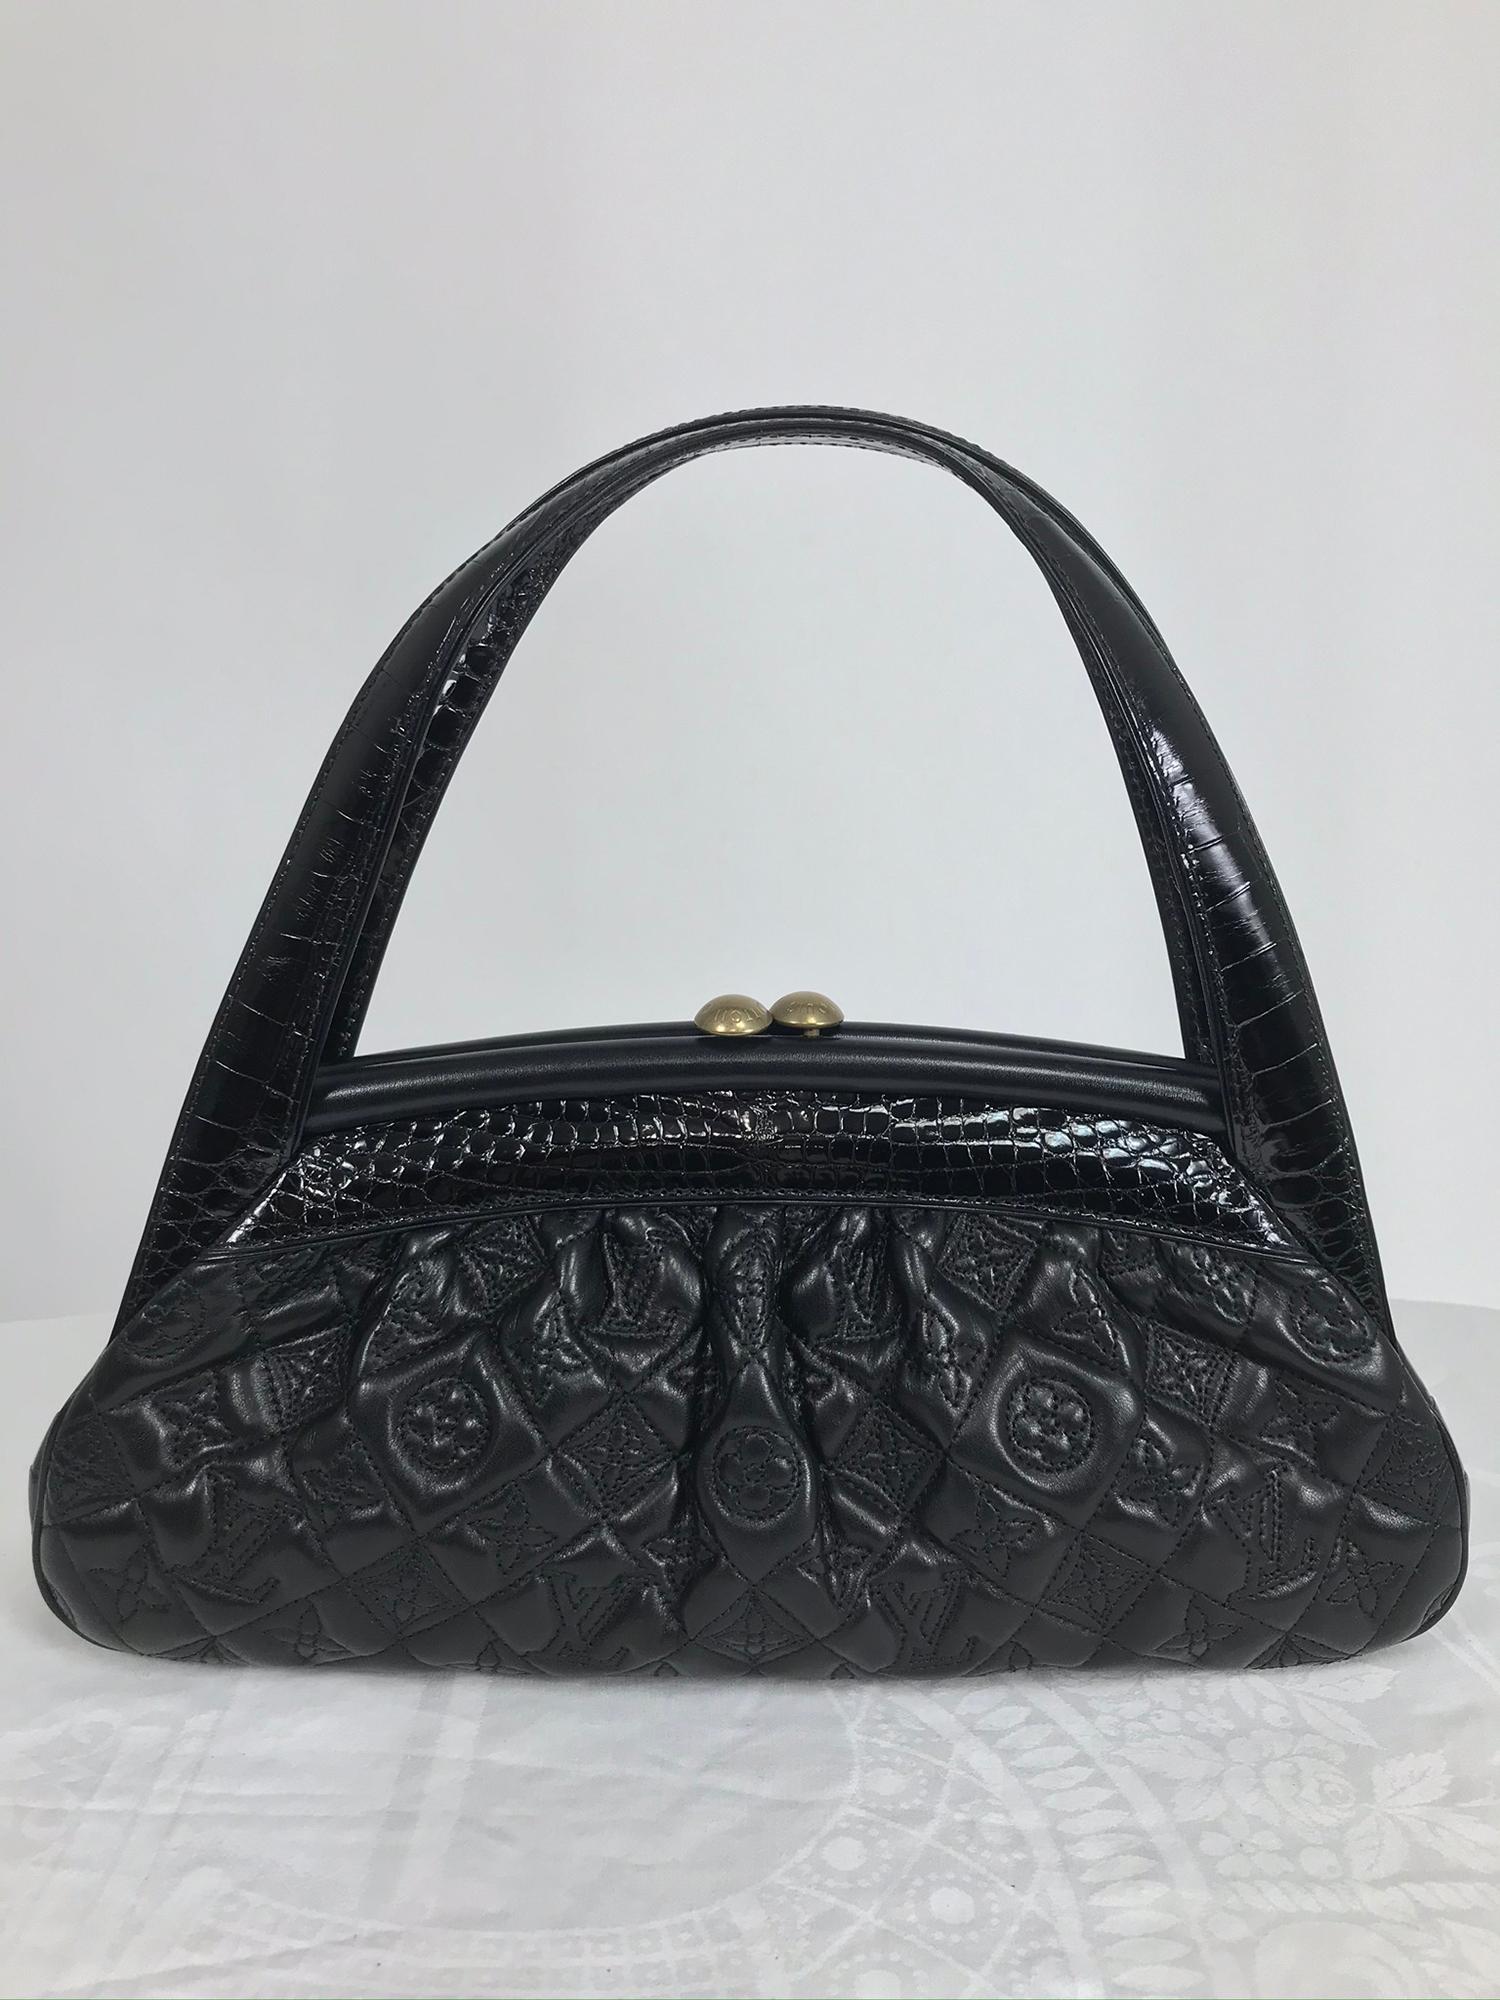 Rare Louis Vuitton Limited Edition Black Alligator Monogram Vienna Sac Fermoir MM Bag, 
from the Fall/Winter 2005 runway collection.  Gorgeous quilted lambskin leather embroidered to highlight the monogram design, the bag is ruched for added detail.